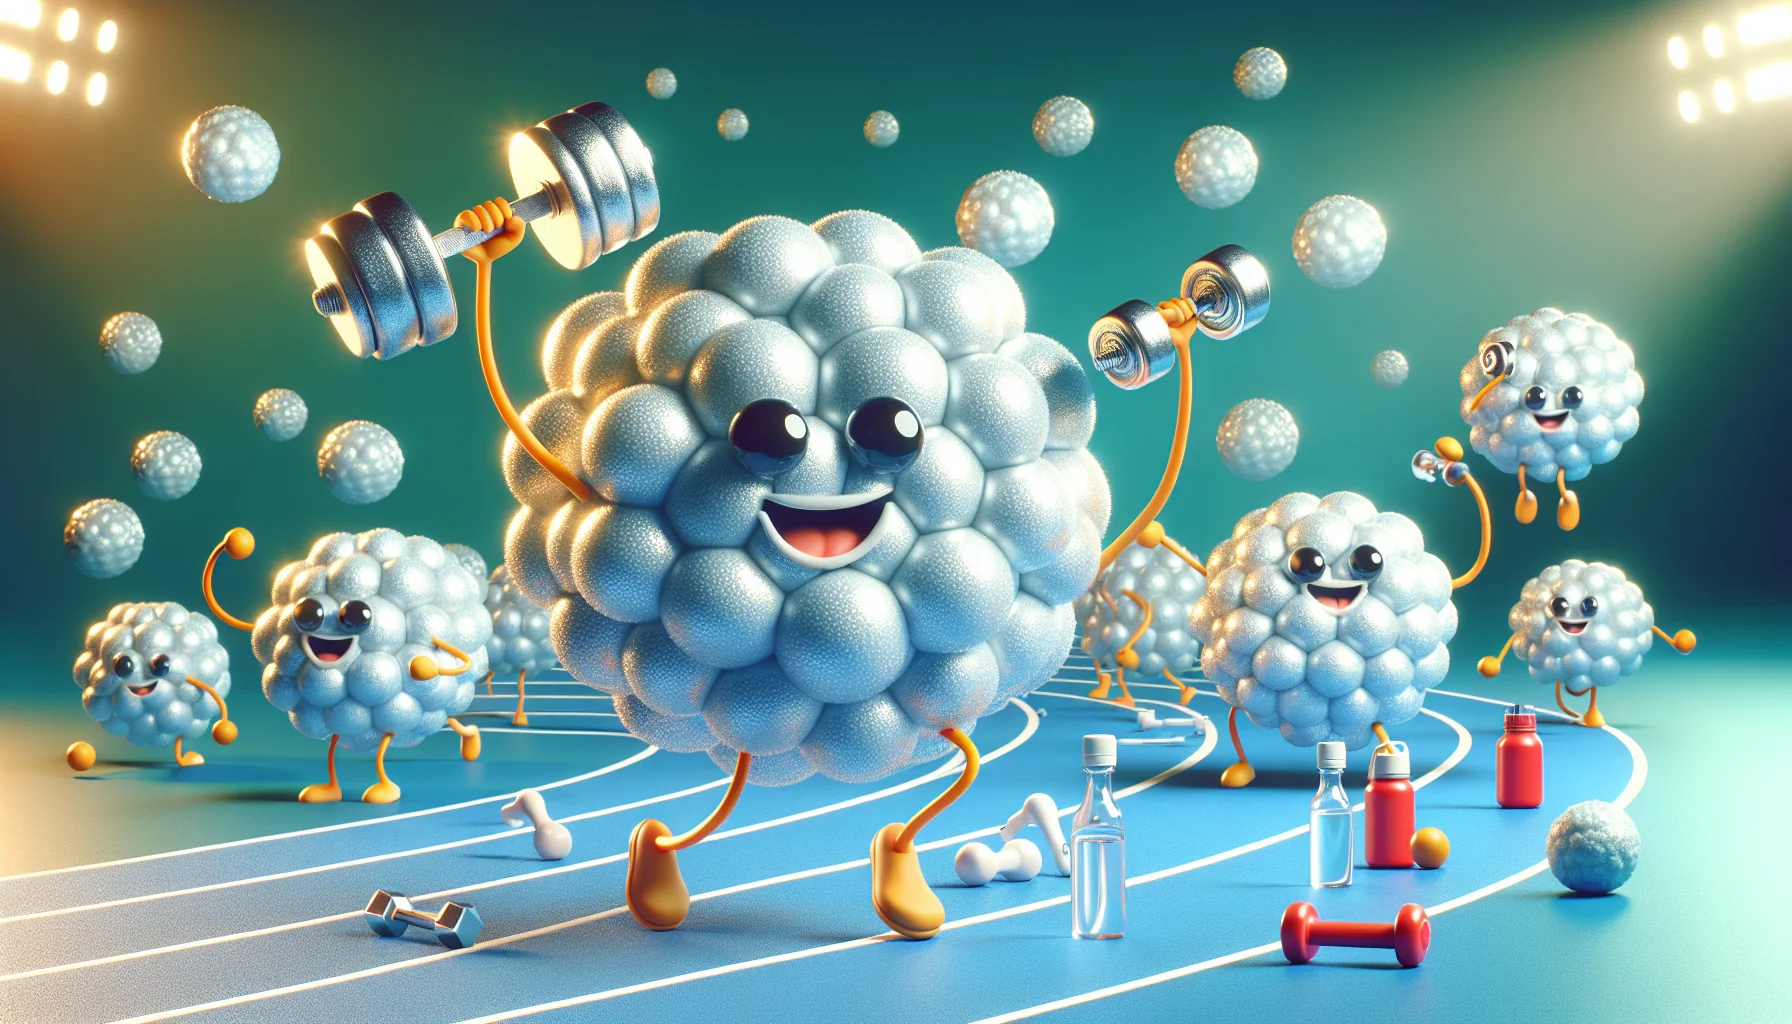 Create a vivid scene of microscopic magnesium atoms visualized as spherical entities with expressive facial features, engaged in humorous activities. These atoms might be lifting tiny dumbbells, running on a microscopic track or hydrating with minuscule water bottles, metaphorically signifying the use of magnesium in sports supplements. Convey a positive, fun, and healthy atmosphere to illustrate the benefits of dietary supplements in physical activities and sports. Enhance the scene with the light, radiant glow of magnesium to highlight it as the theme. Avoid any human figures in this image.